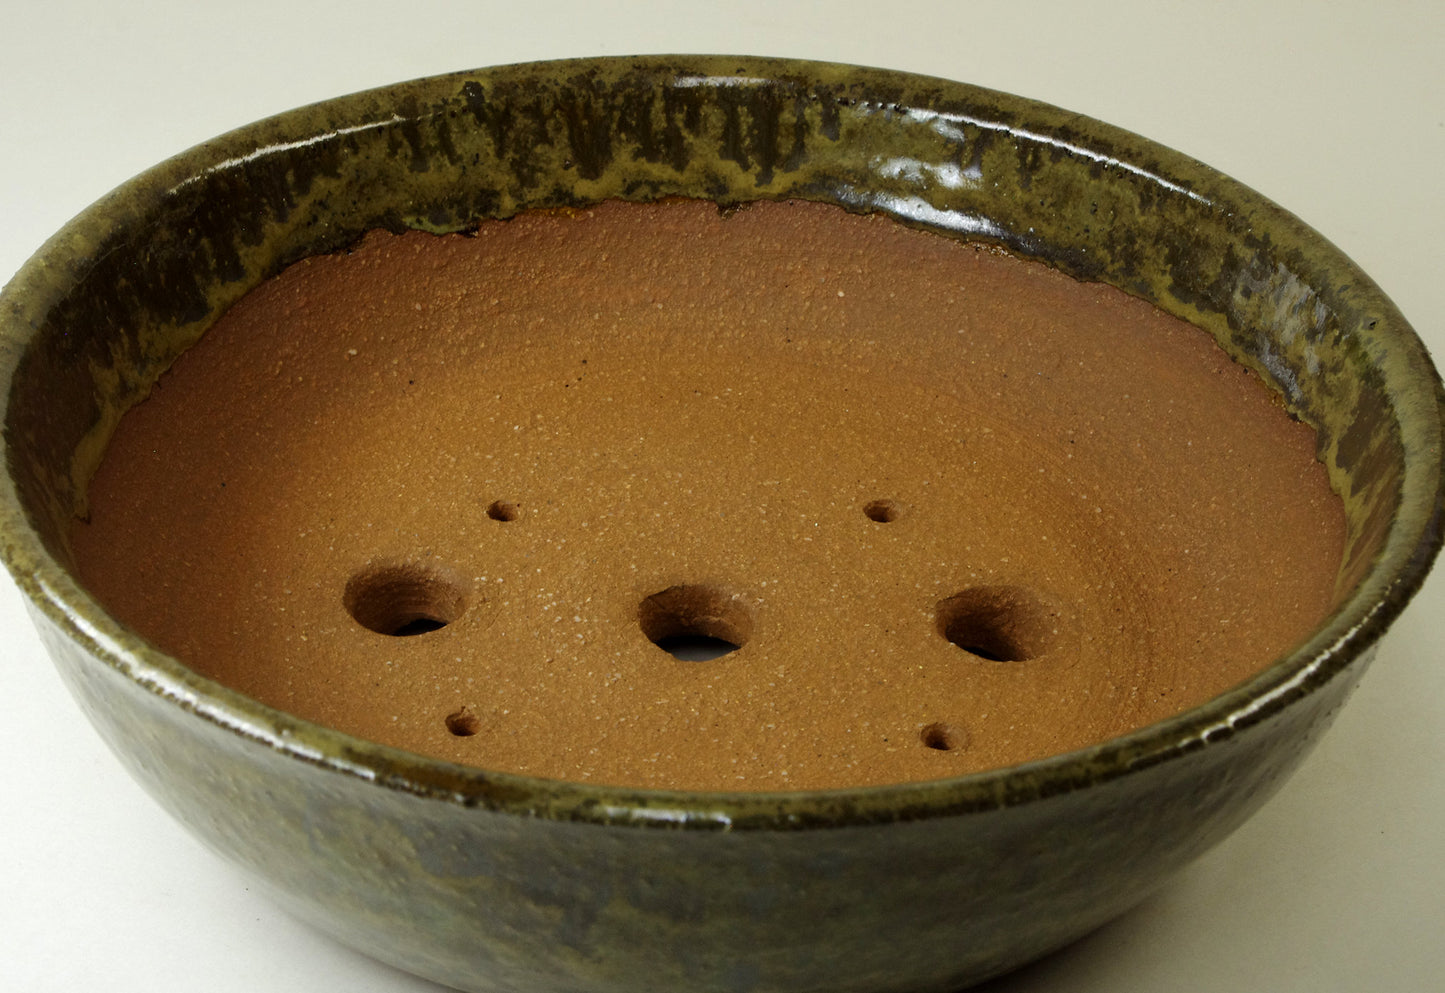 12100, Hand Thrown Stoneware Bonsai Pot,  Greens, 8 1/2 x 2 1/2, With Extra Wire Holes